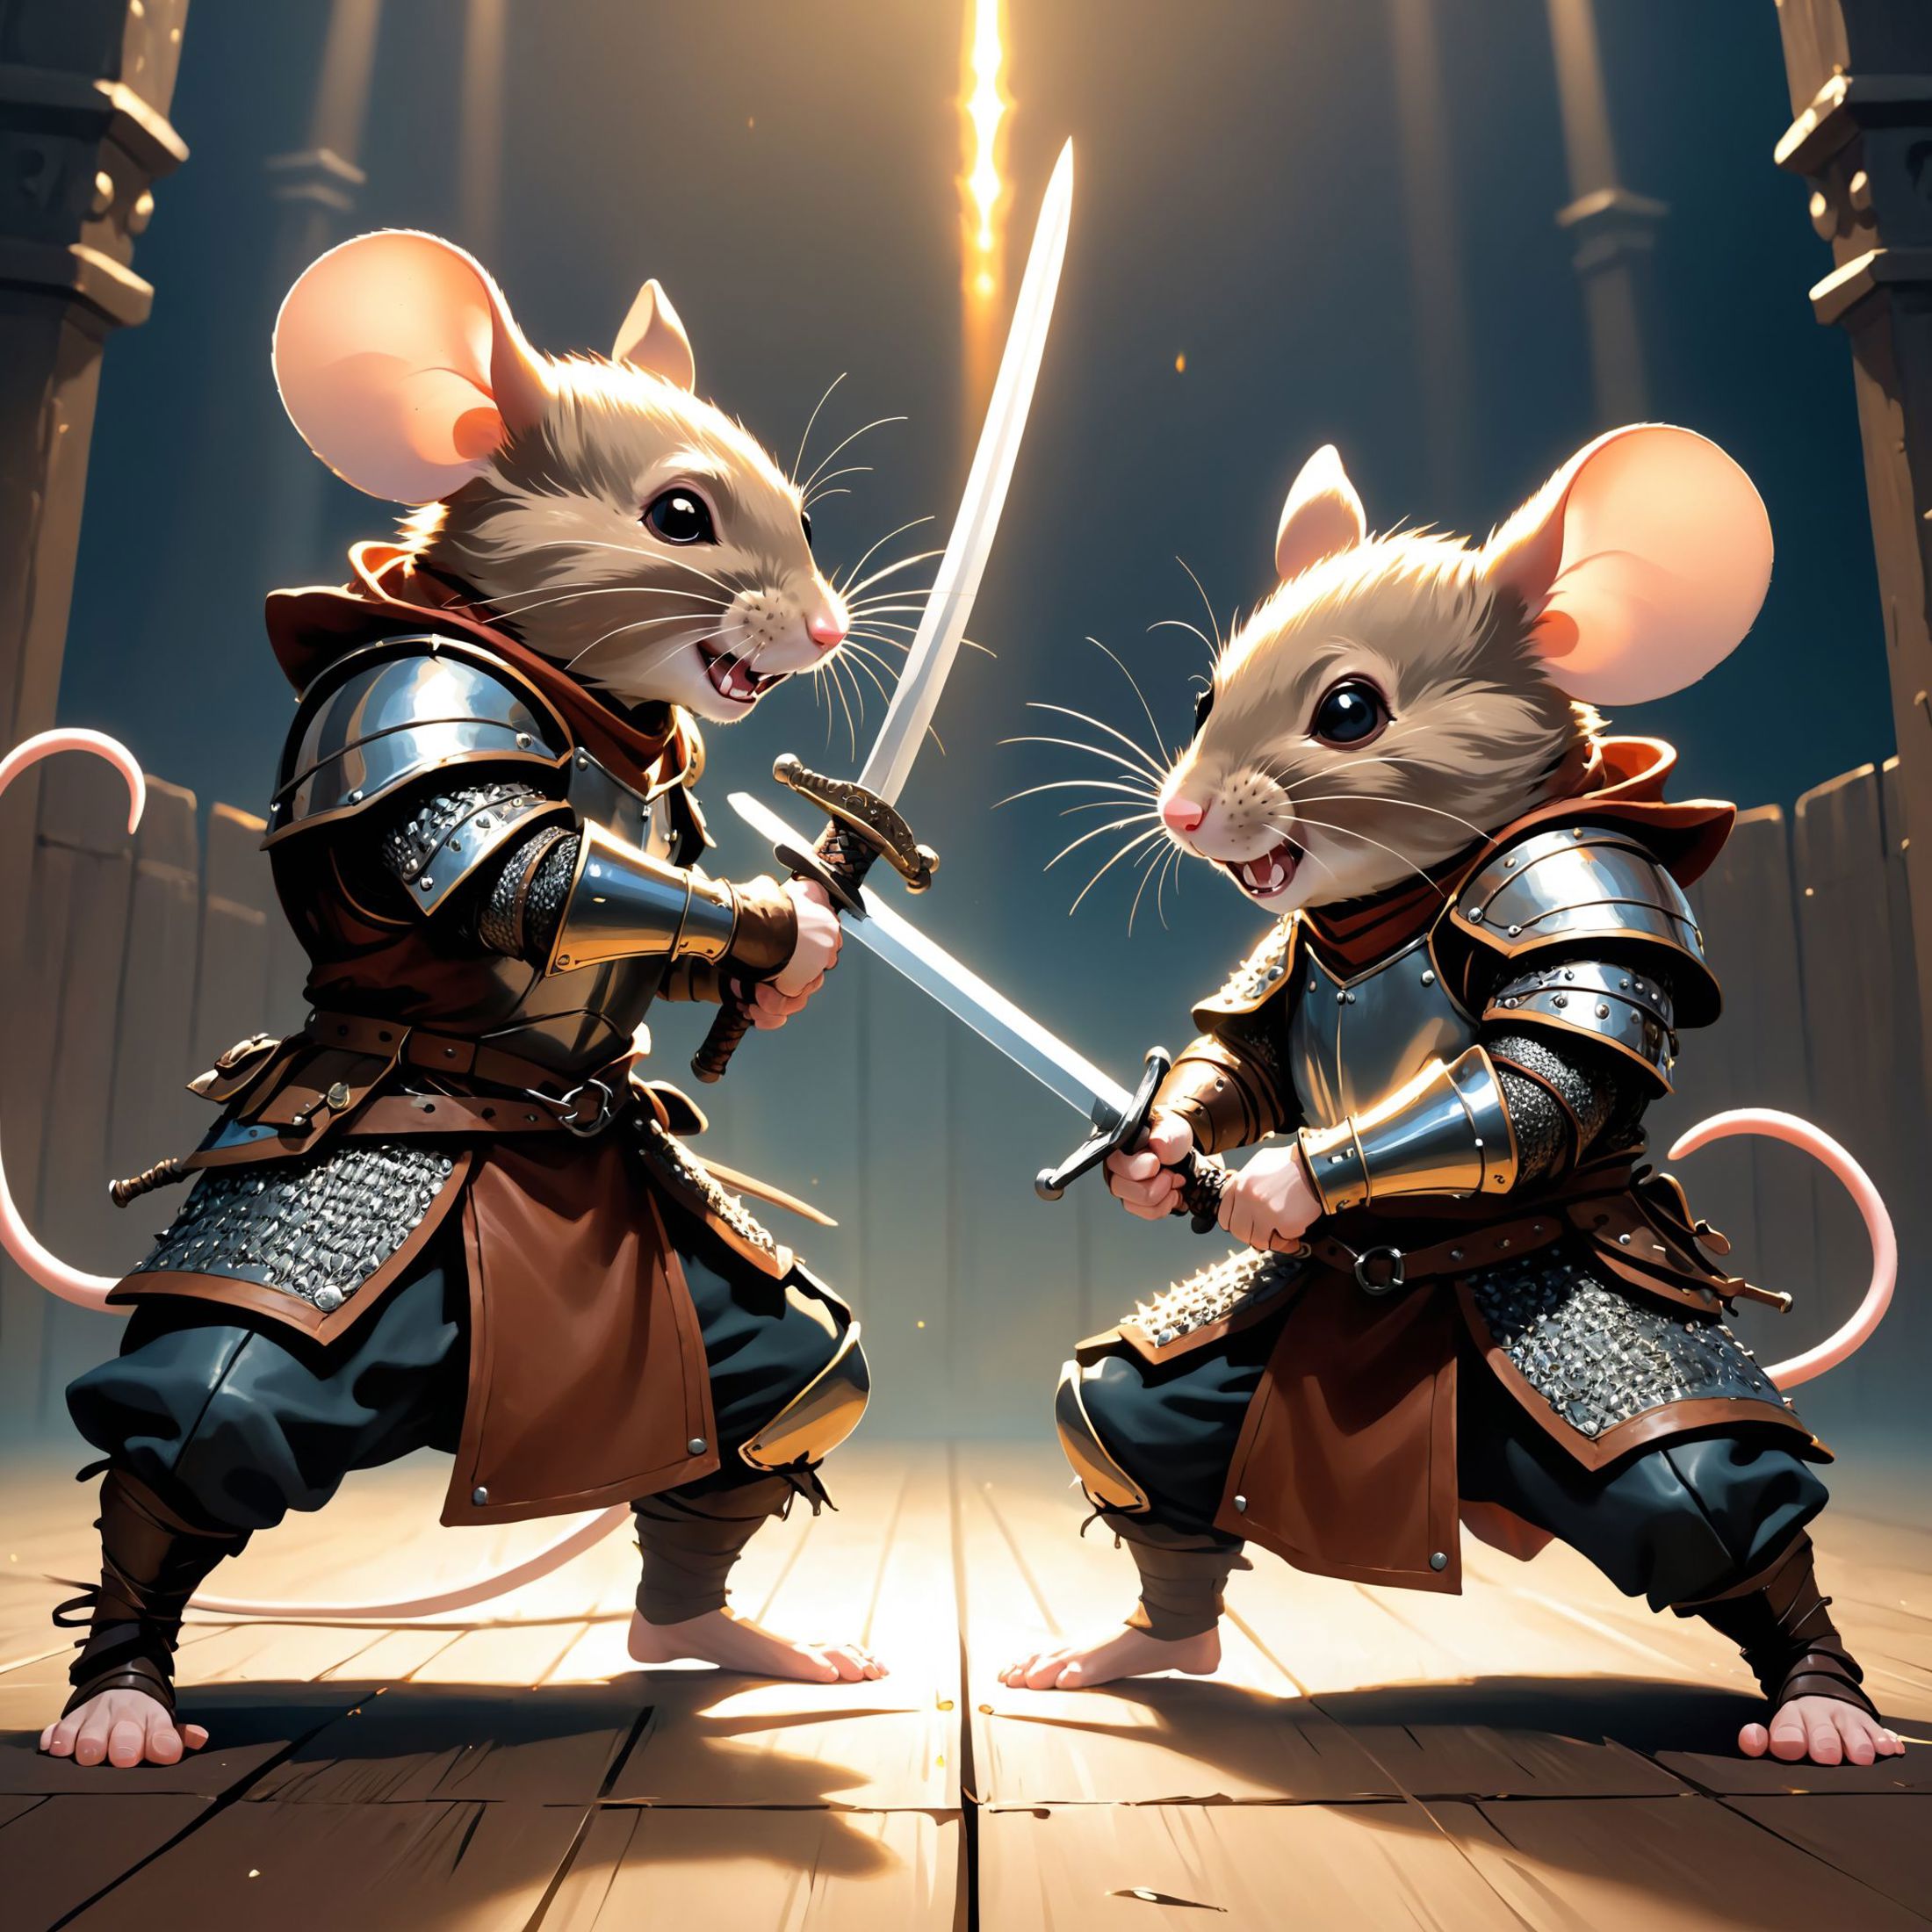 Two Mice in Armor Holding Swords and Playing with Each Other